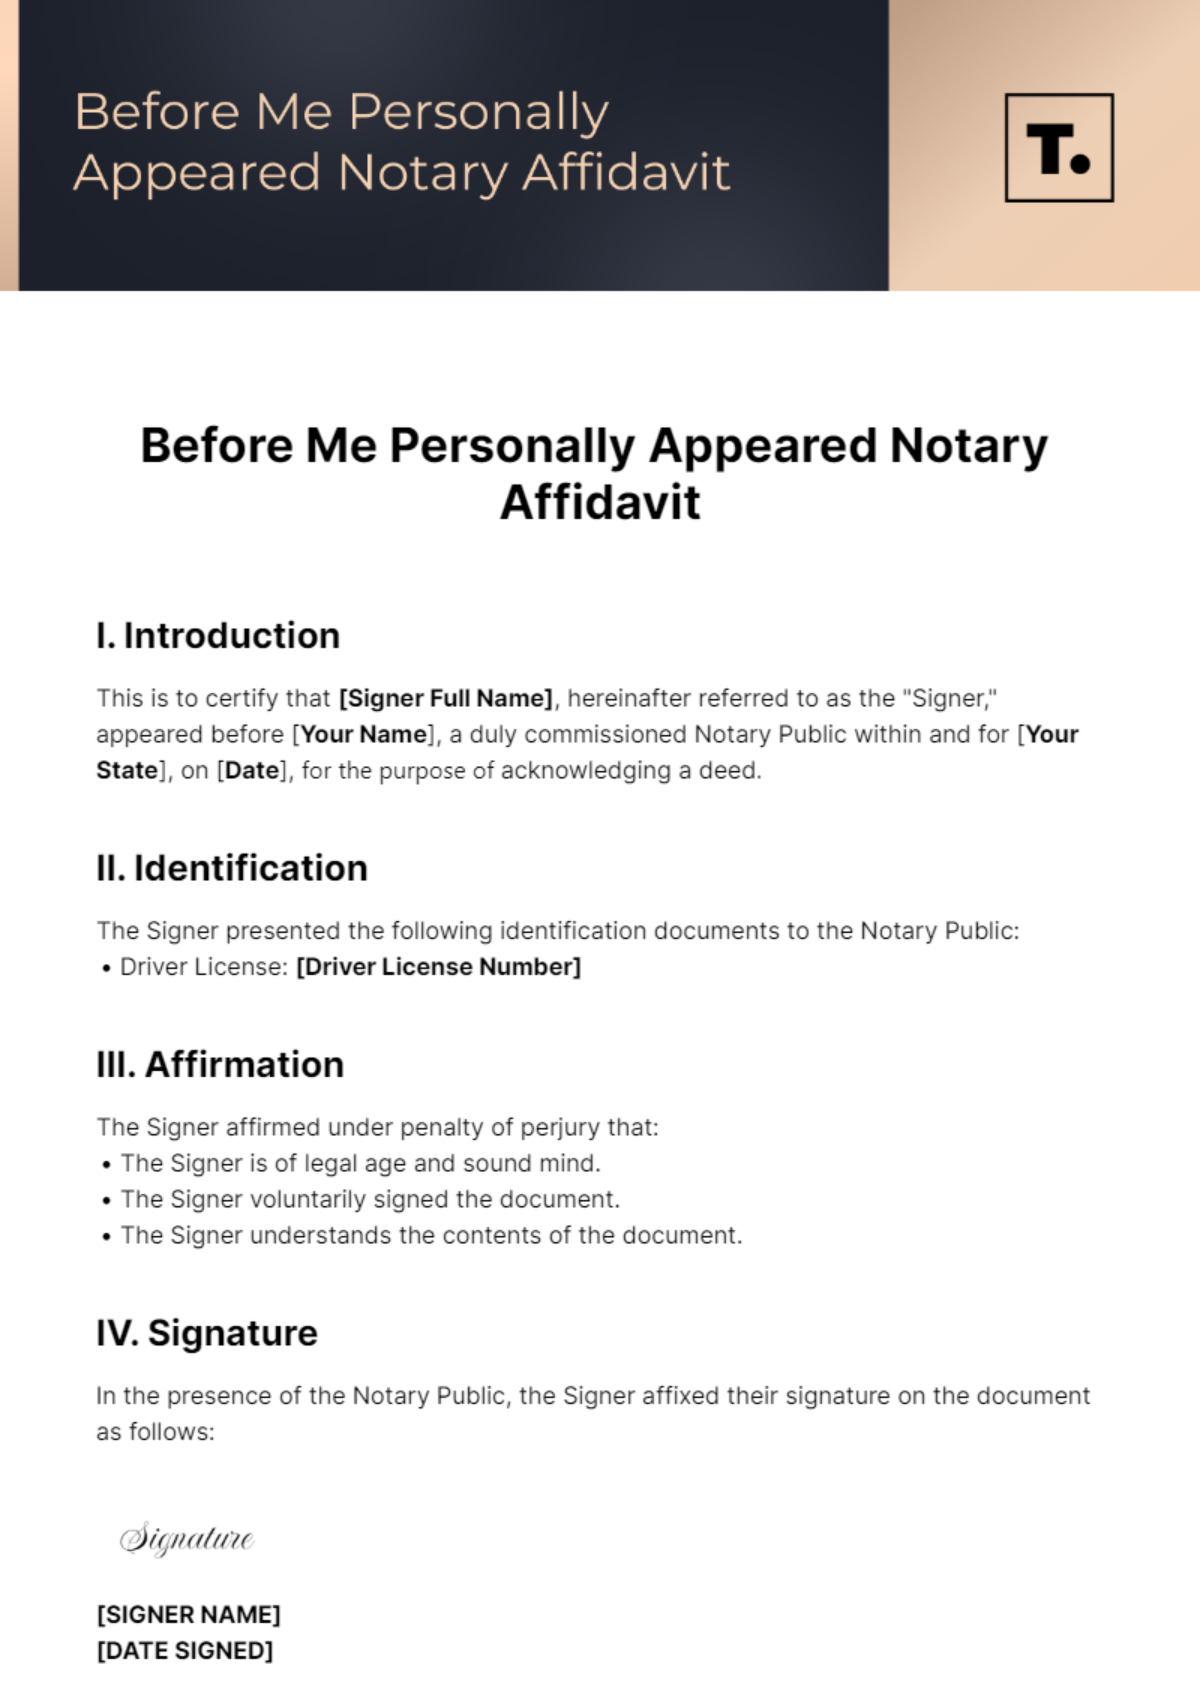 Before Me Personally Appeared Notary Affidavit Template